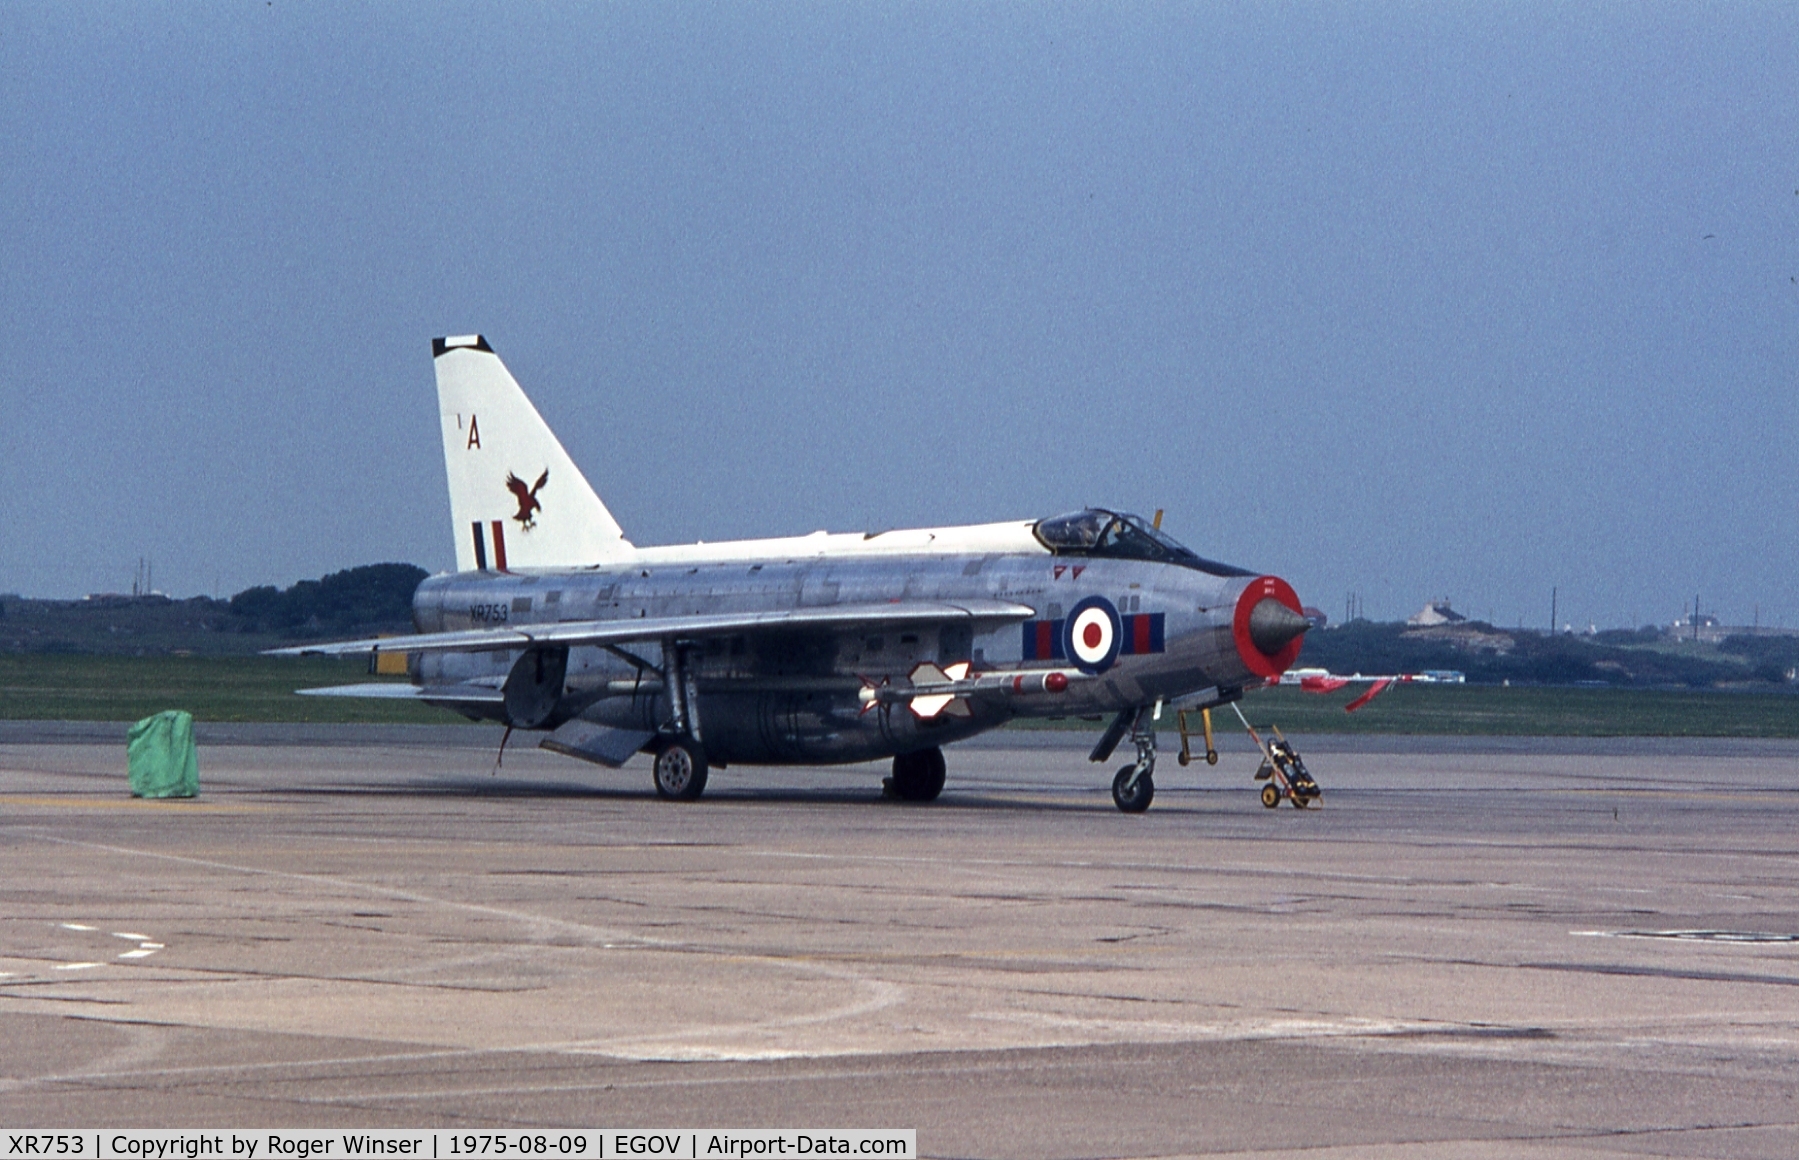 XR753, 1965 English Electric Lightning F.6 C/N 95218, Coded A of 23 Squadron RAF at the RAF Valley Airshow 1975.